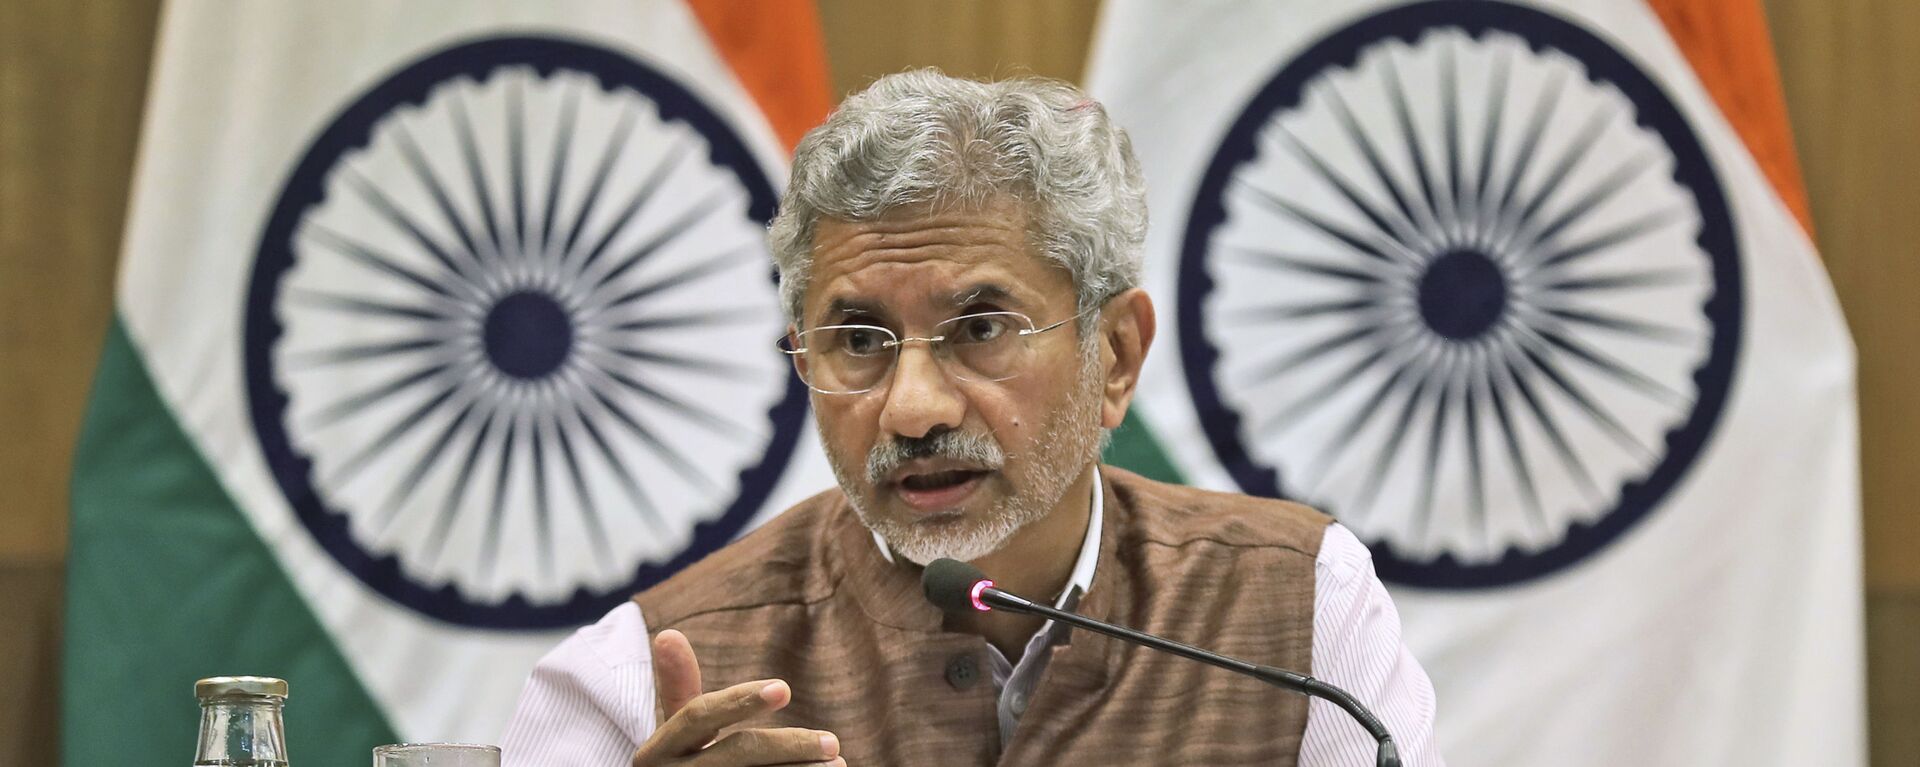 Indian Foreign Minister Subrahmanyam Jaishankar addresses a press conference on the performance of the ministry of external affairs in first 100 days of Prime Minister Narendra Modi's new term in office in New Delhi, India, Tuesday, Sept. 17, 2019 - Sputnik International, 1920, 19.08.2021